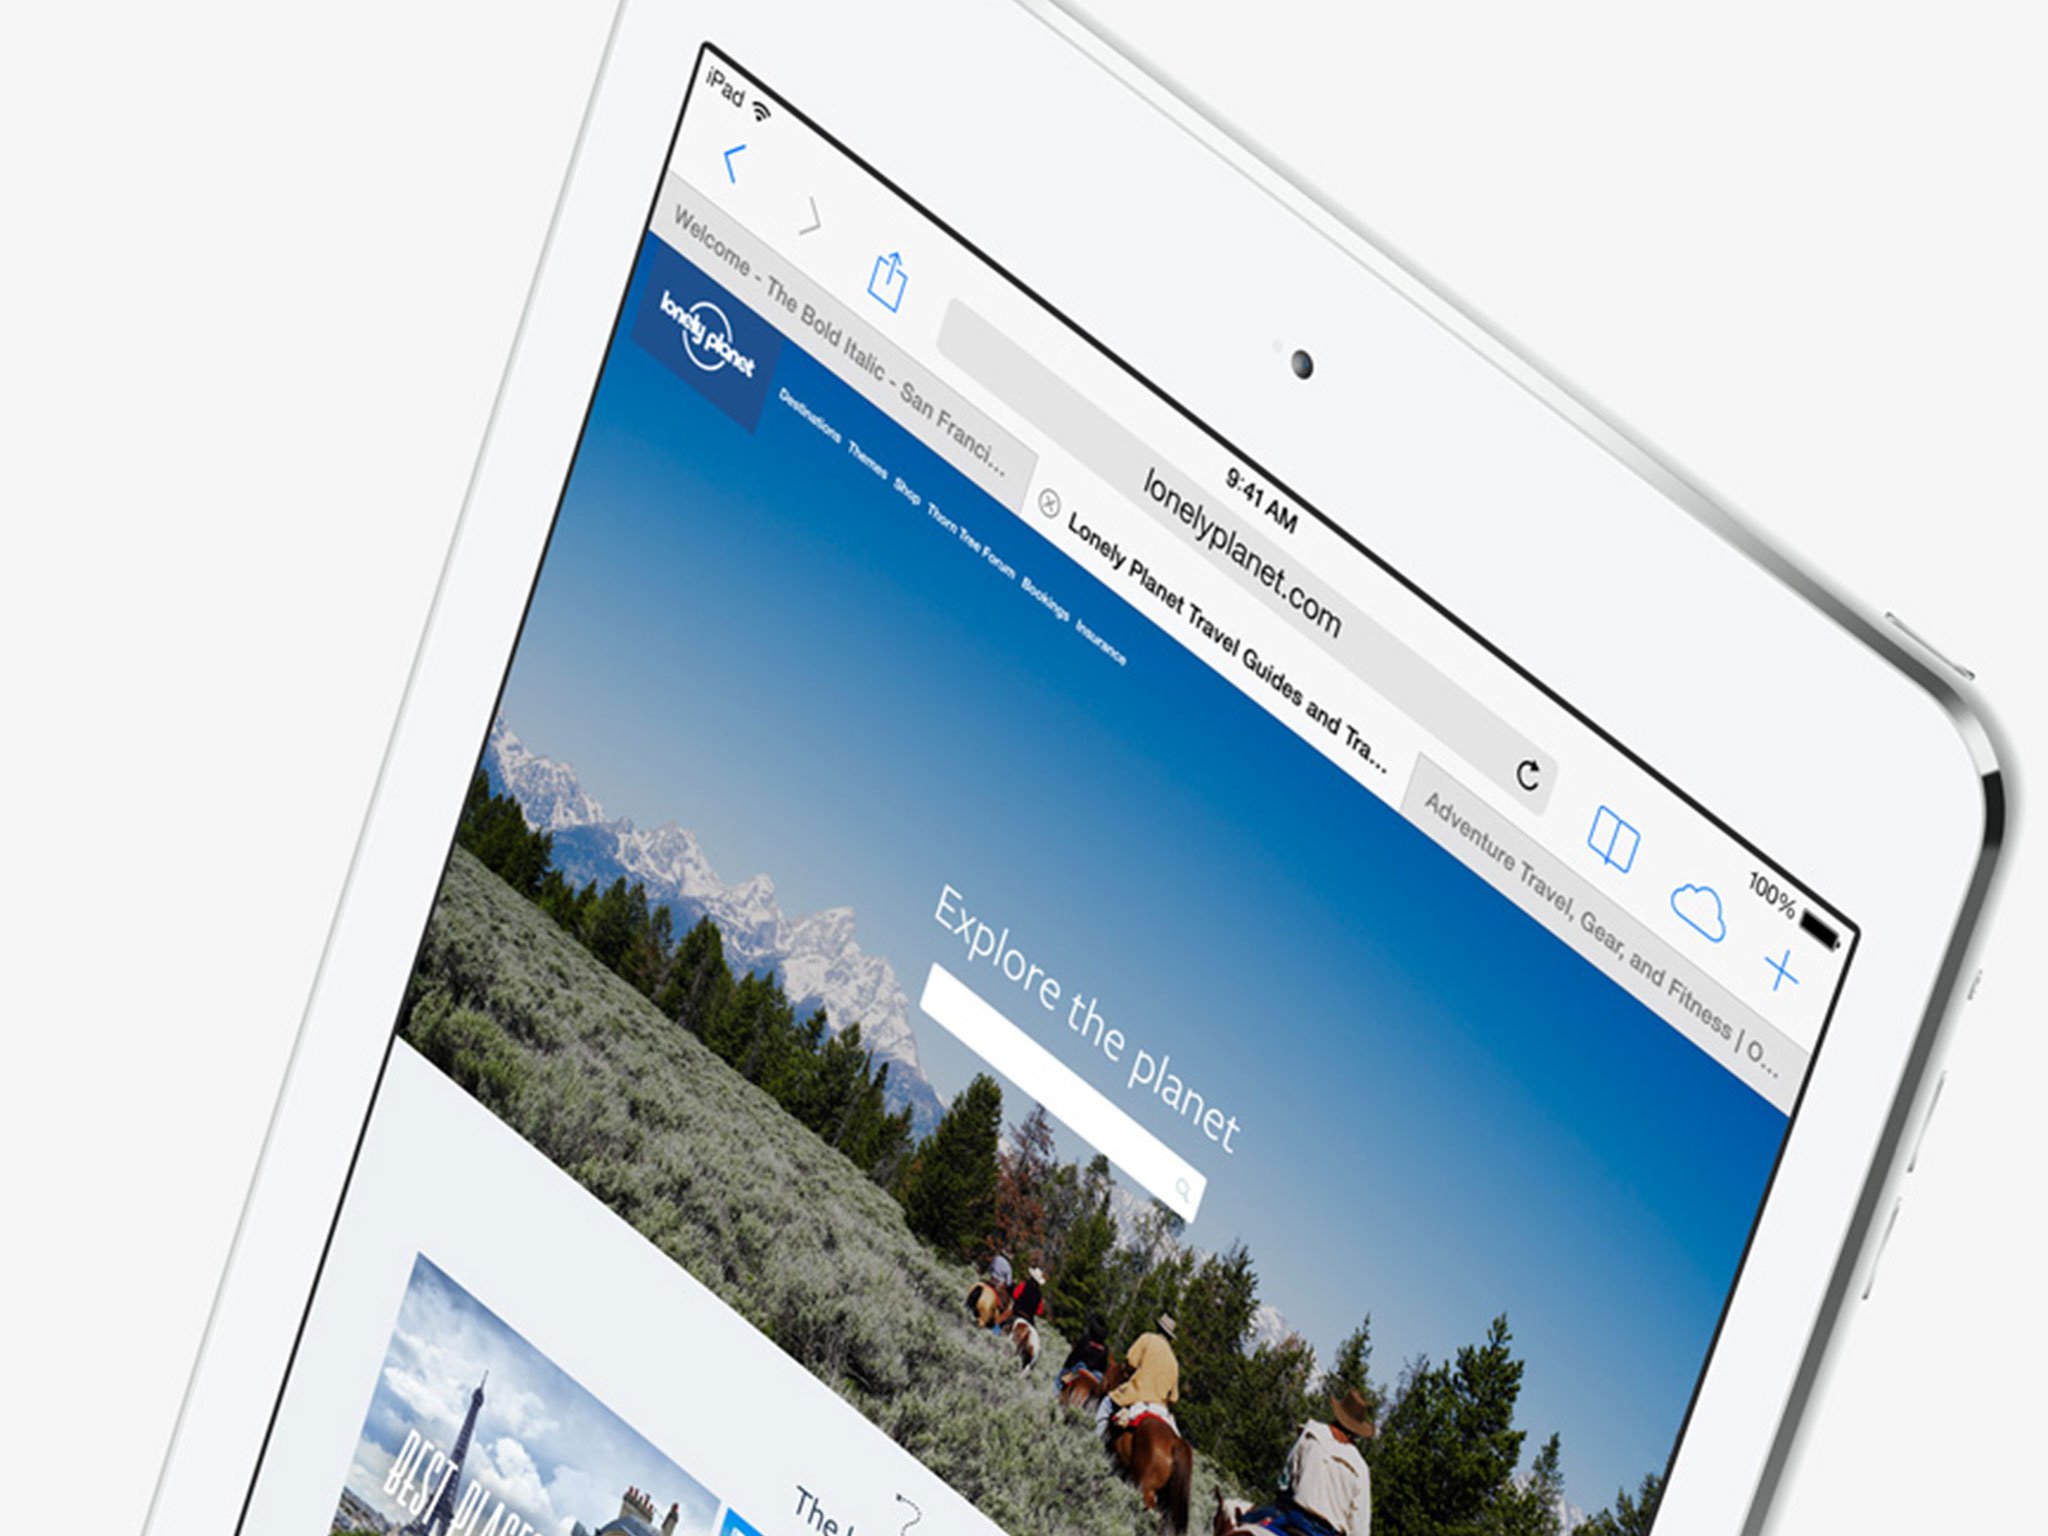 Will you be buying an iPad Air?